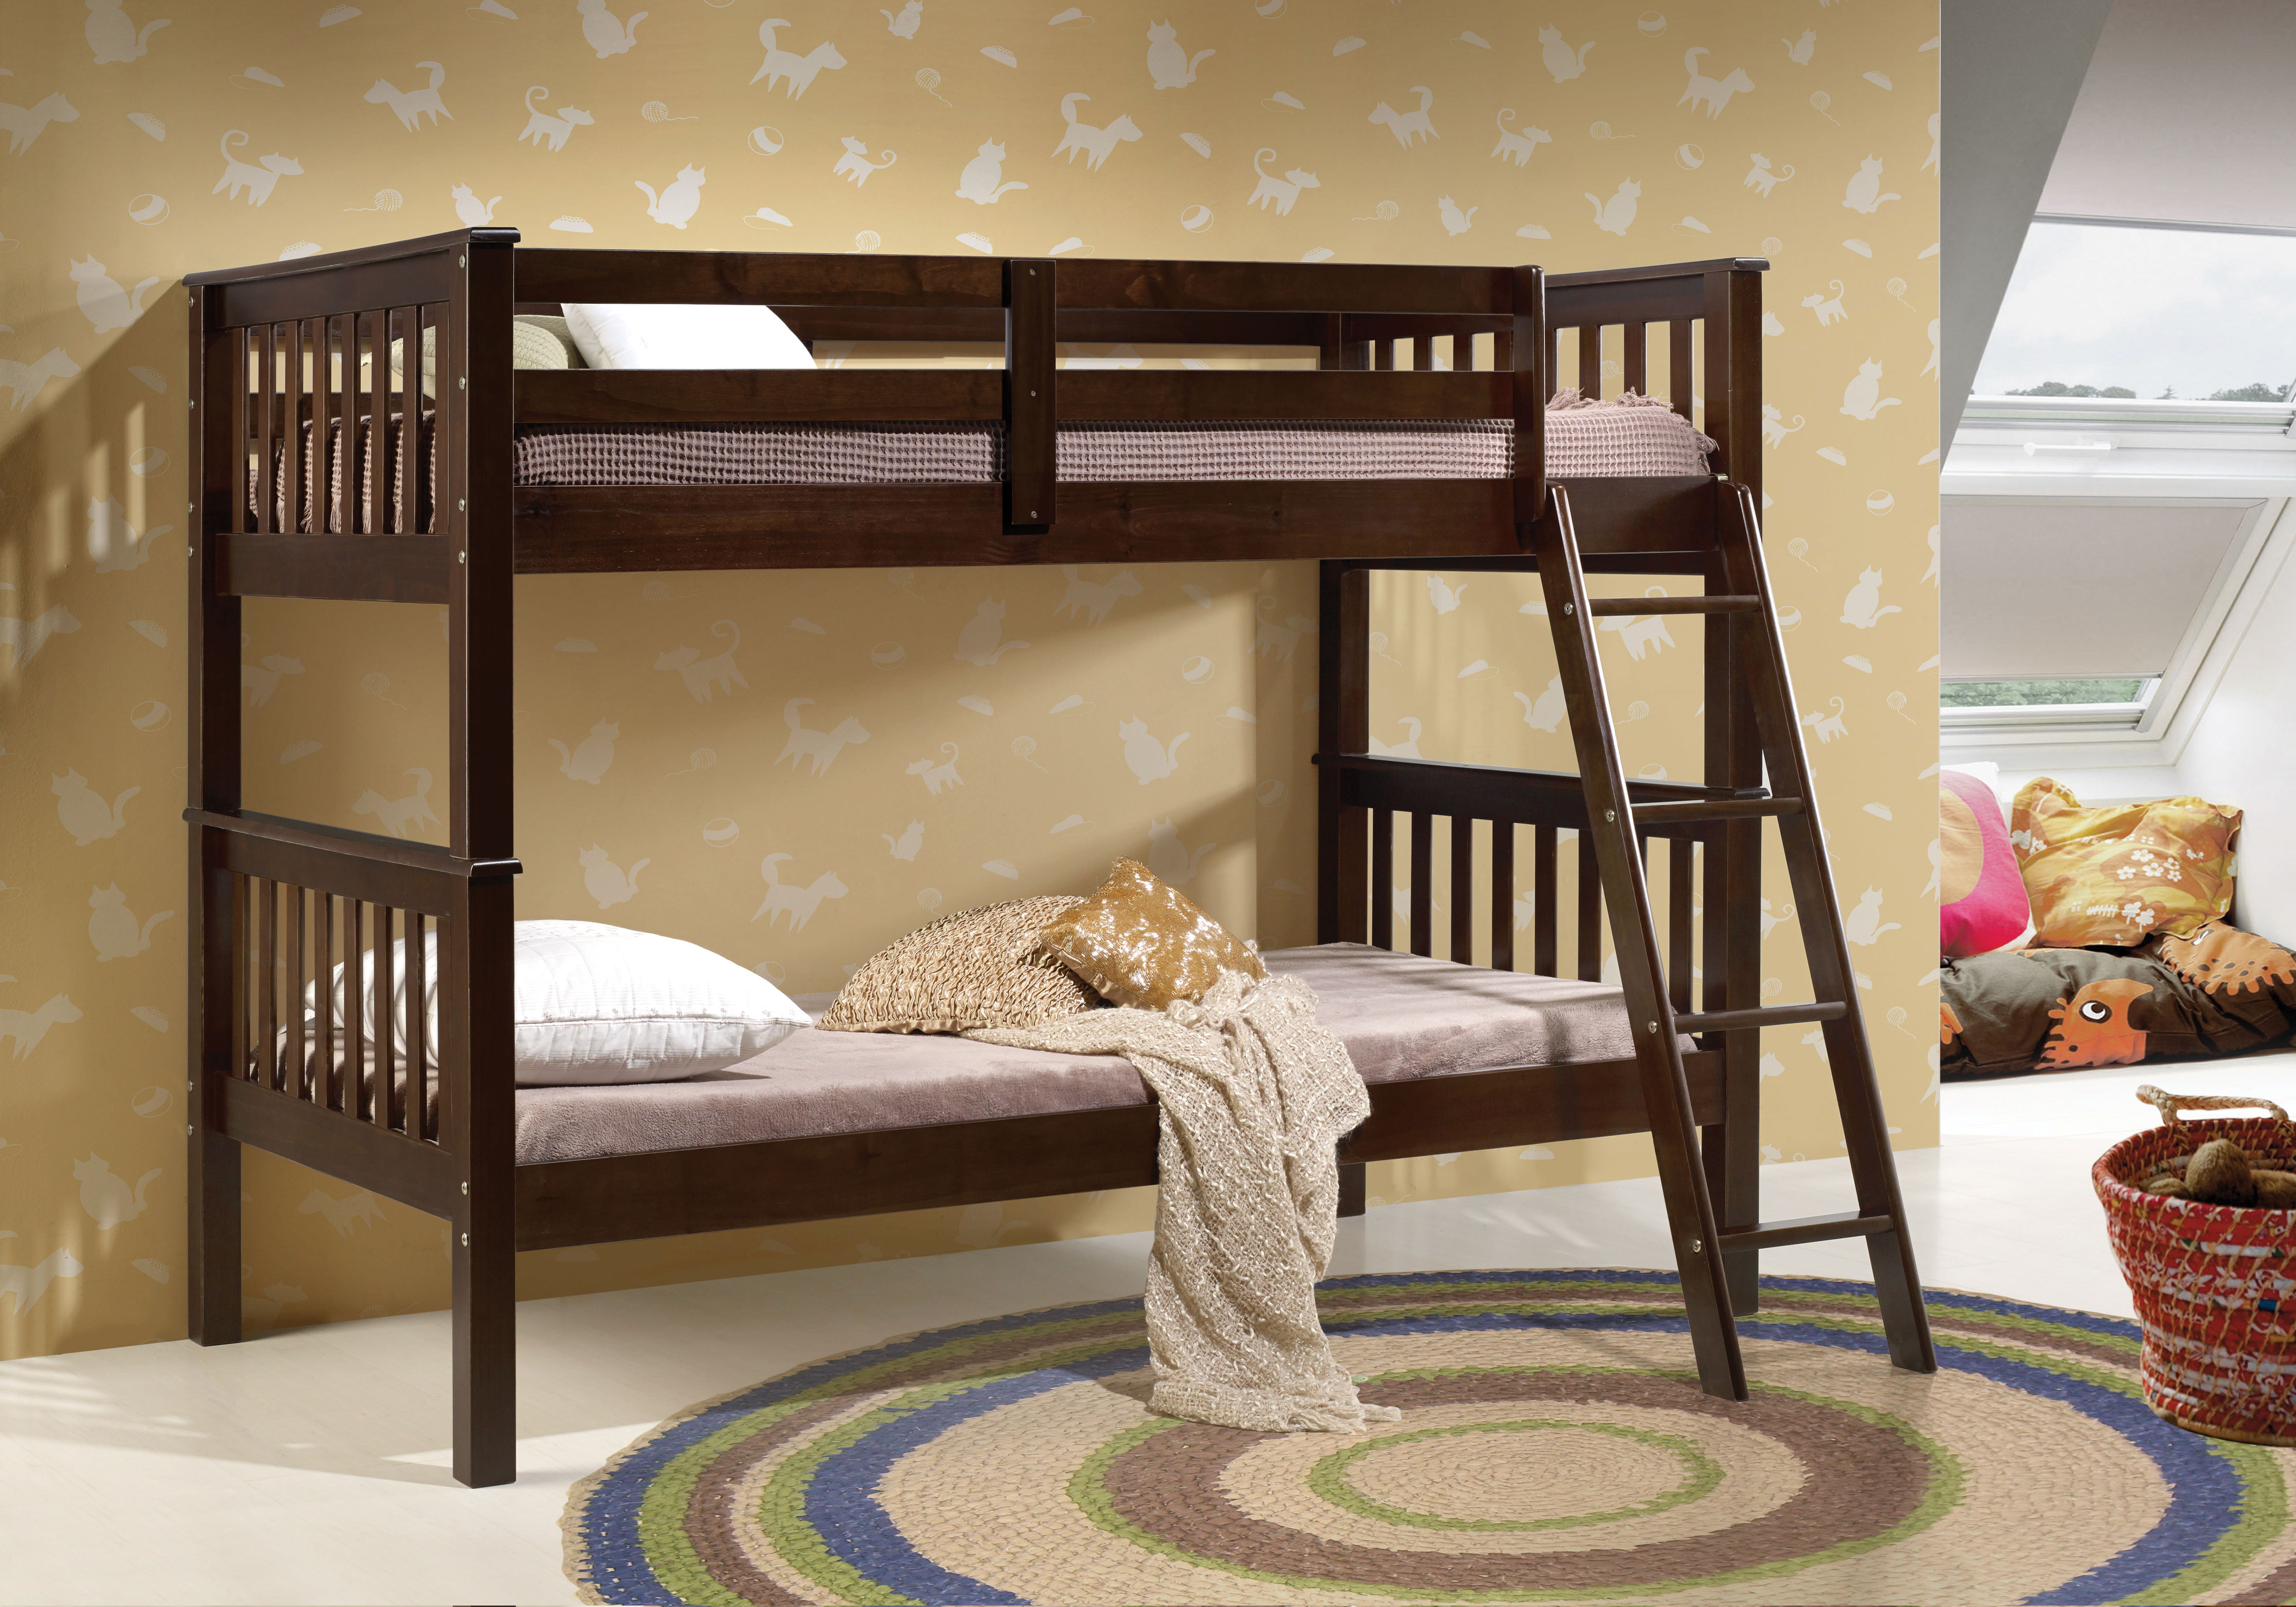 twin bunk bed and mattress